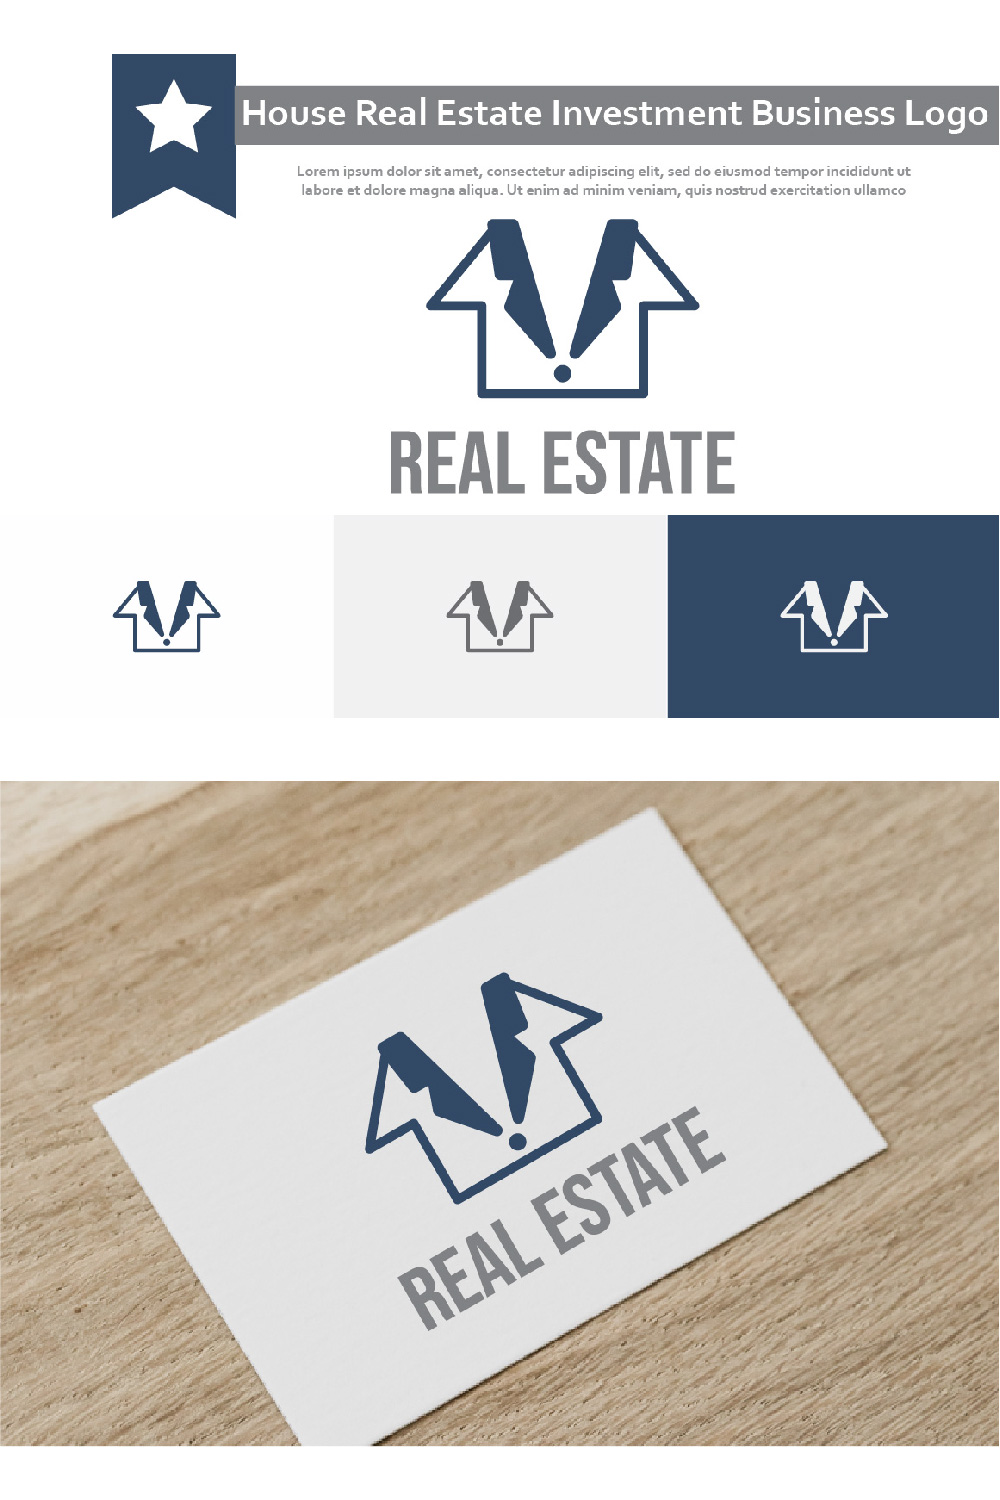 House Real Estate Realty Investment Business Office Logo pinterest.